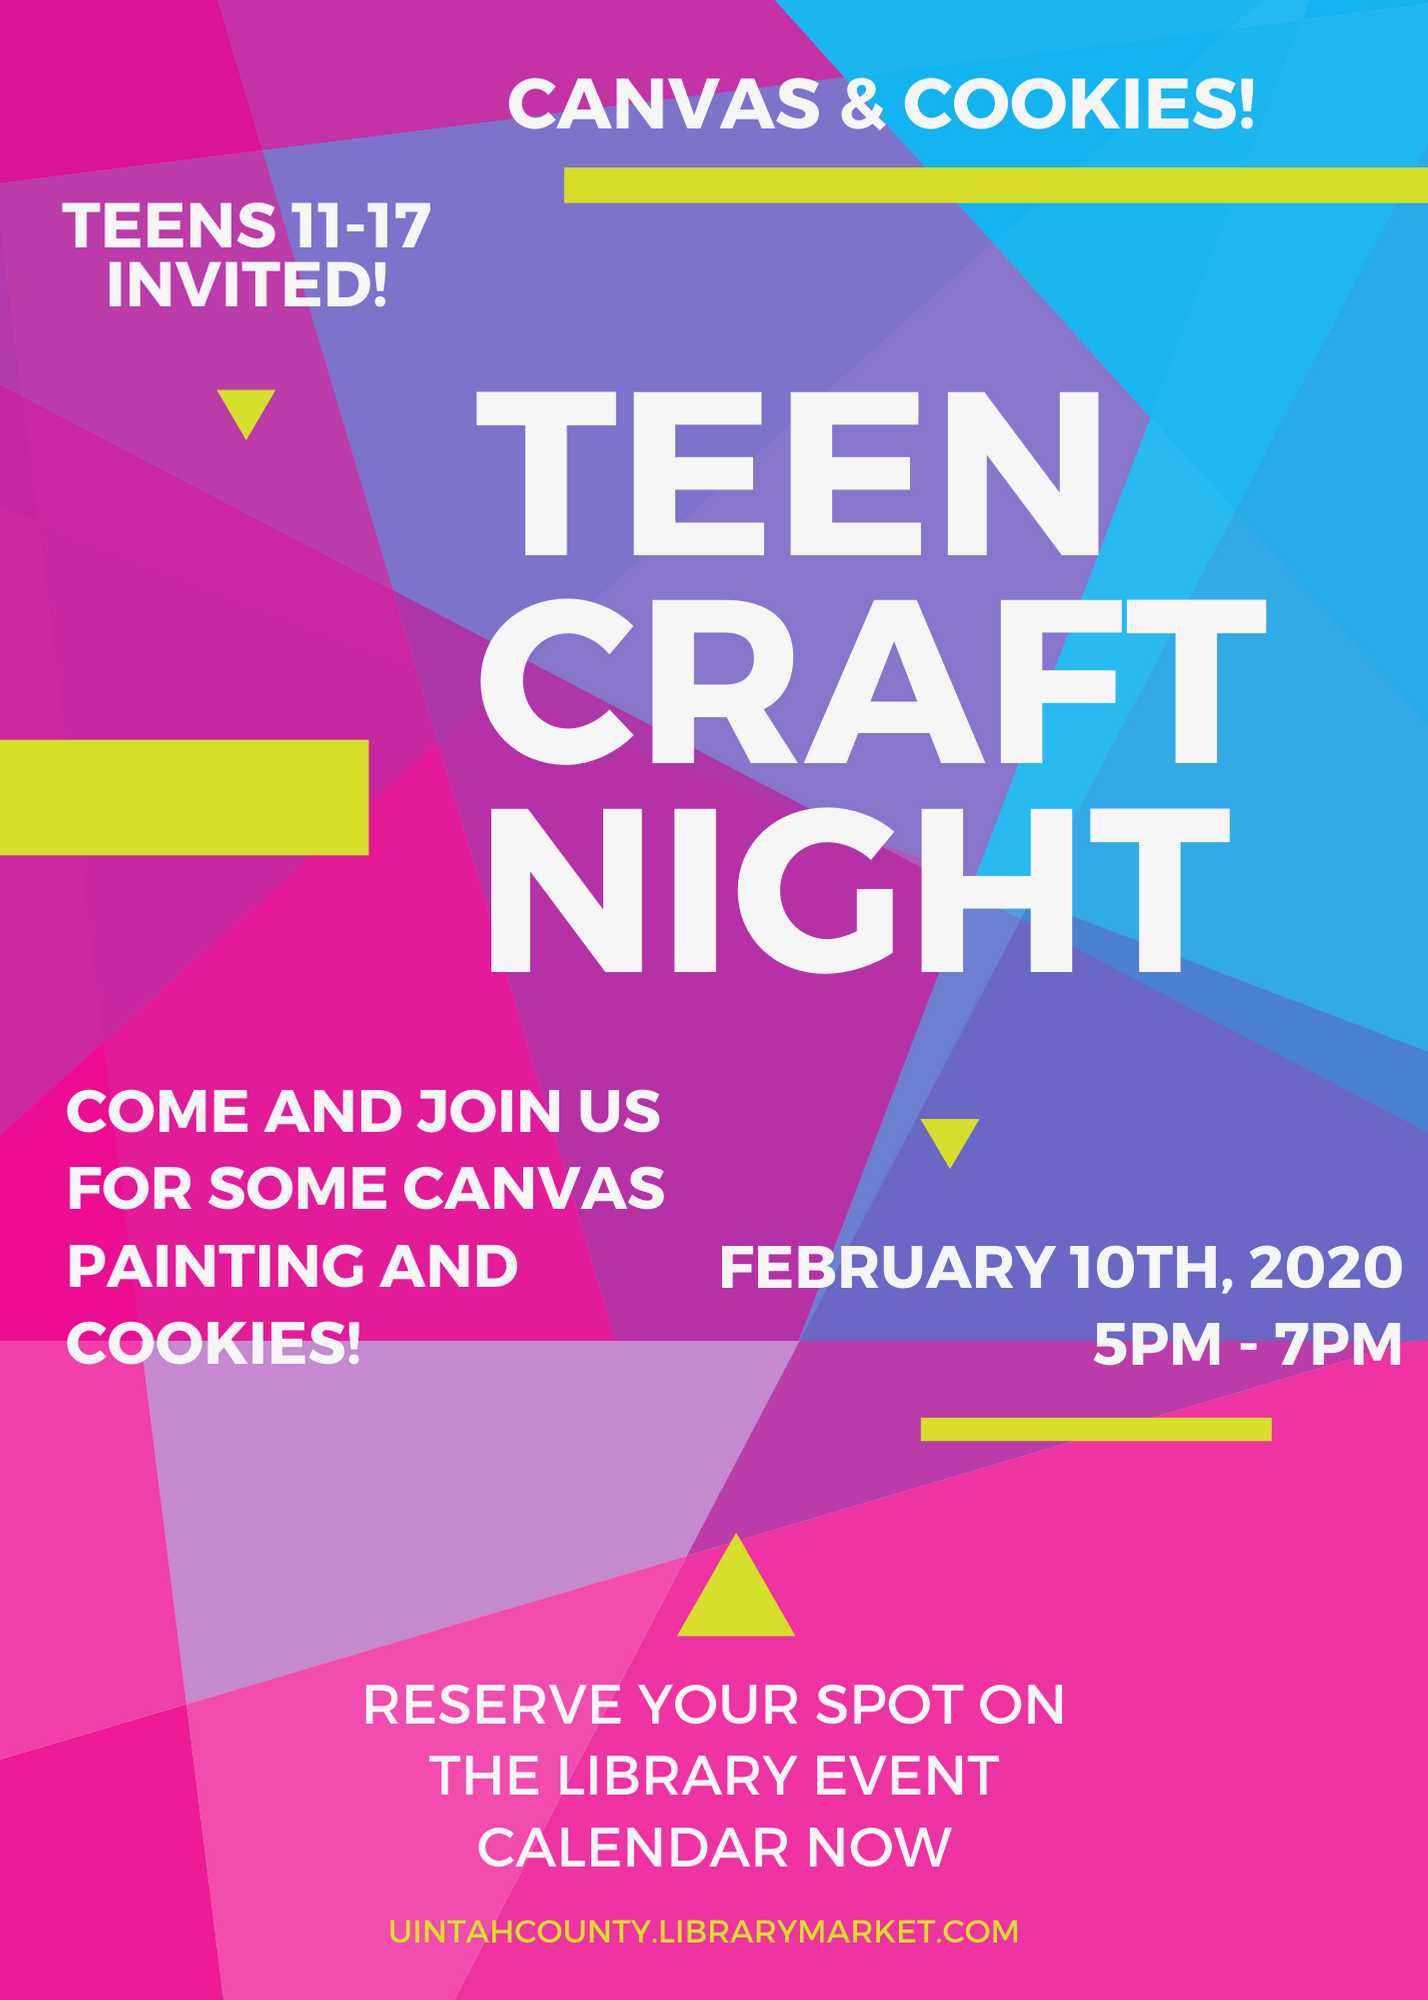 Teen Craft Night: Canvas & Cookies! Teens 11 to 17 invited! Come and join us for some canvas painting and cookies! February 10th, 2020 from 5 to 7 pm. Reserve your spot on the Library Event Calendar now at uintahcounty.librarymarket.com